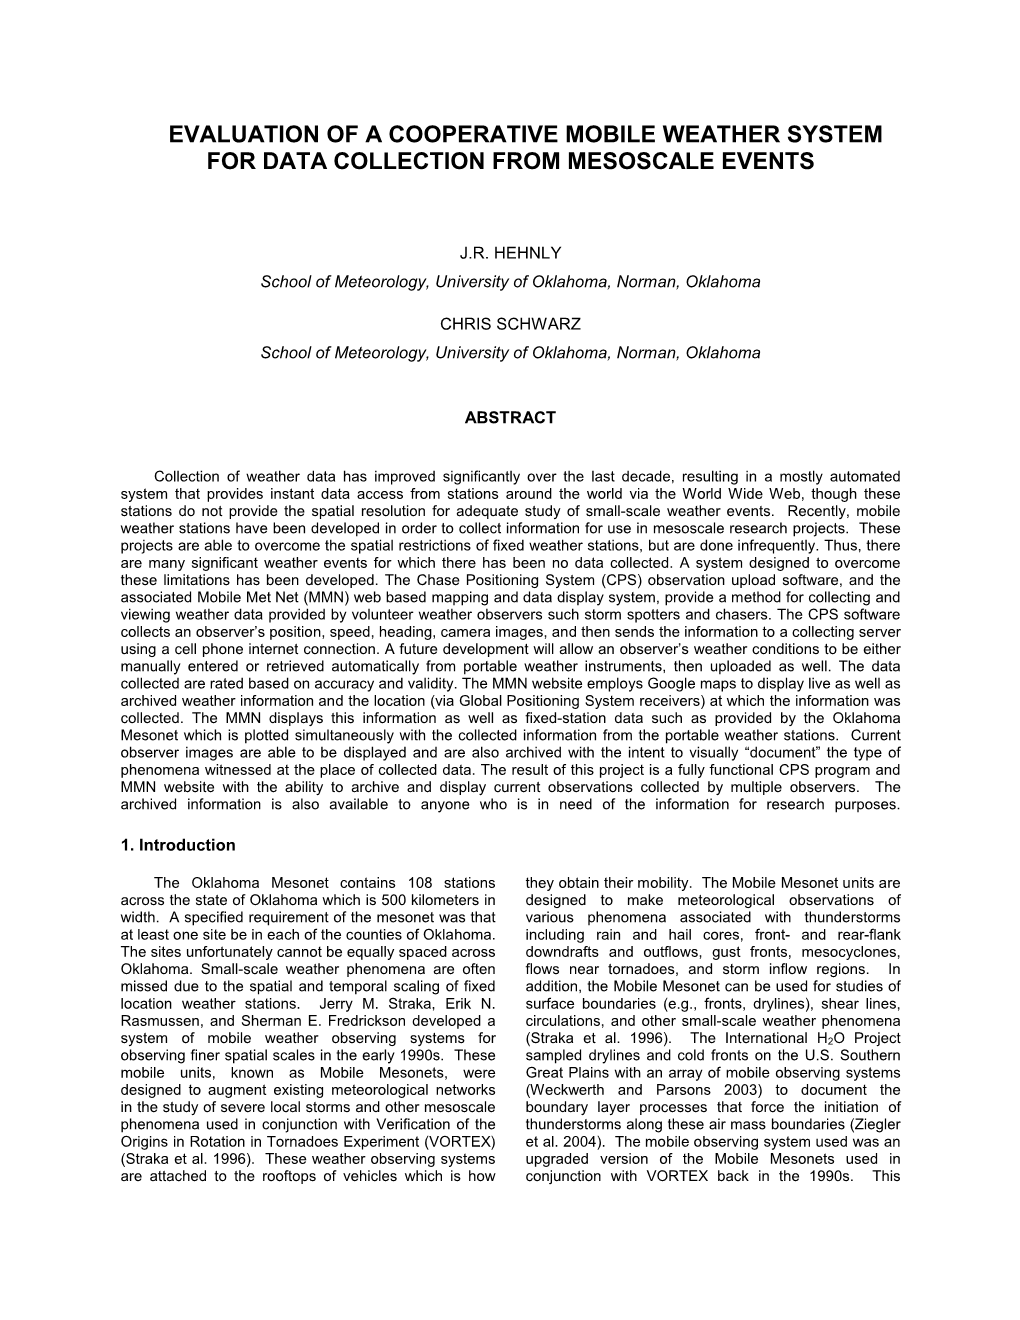 Evaluation of a Cooperative Mobile Weather System for Data Collection from Mesoscale Events